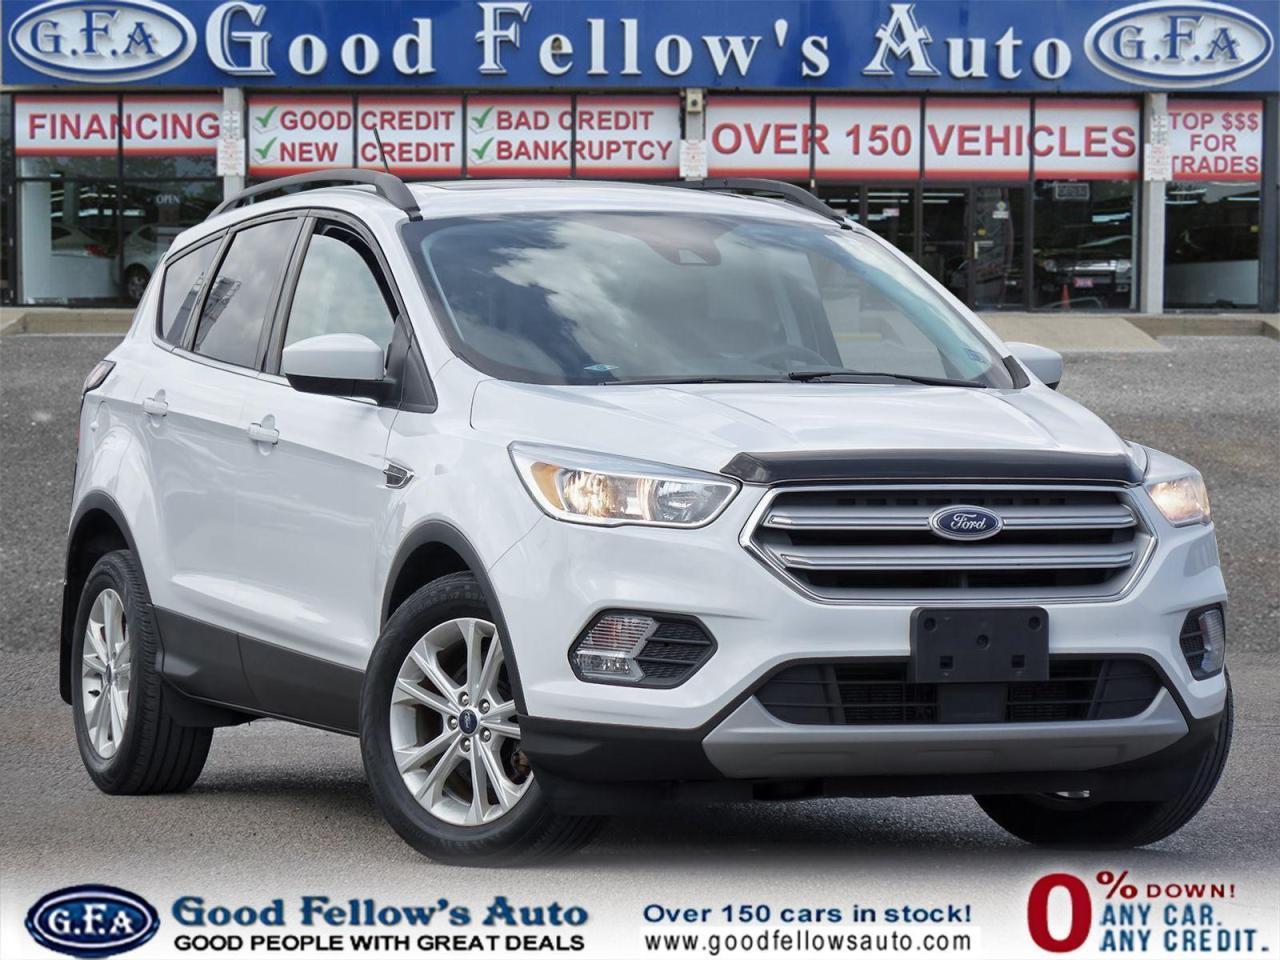 2018 Ford Escape ECOBOOST, FWD, PANORAMIC ROOF, REARVIEW CAMERA, HE - Photo #1